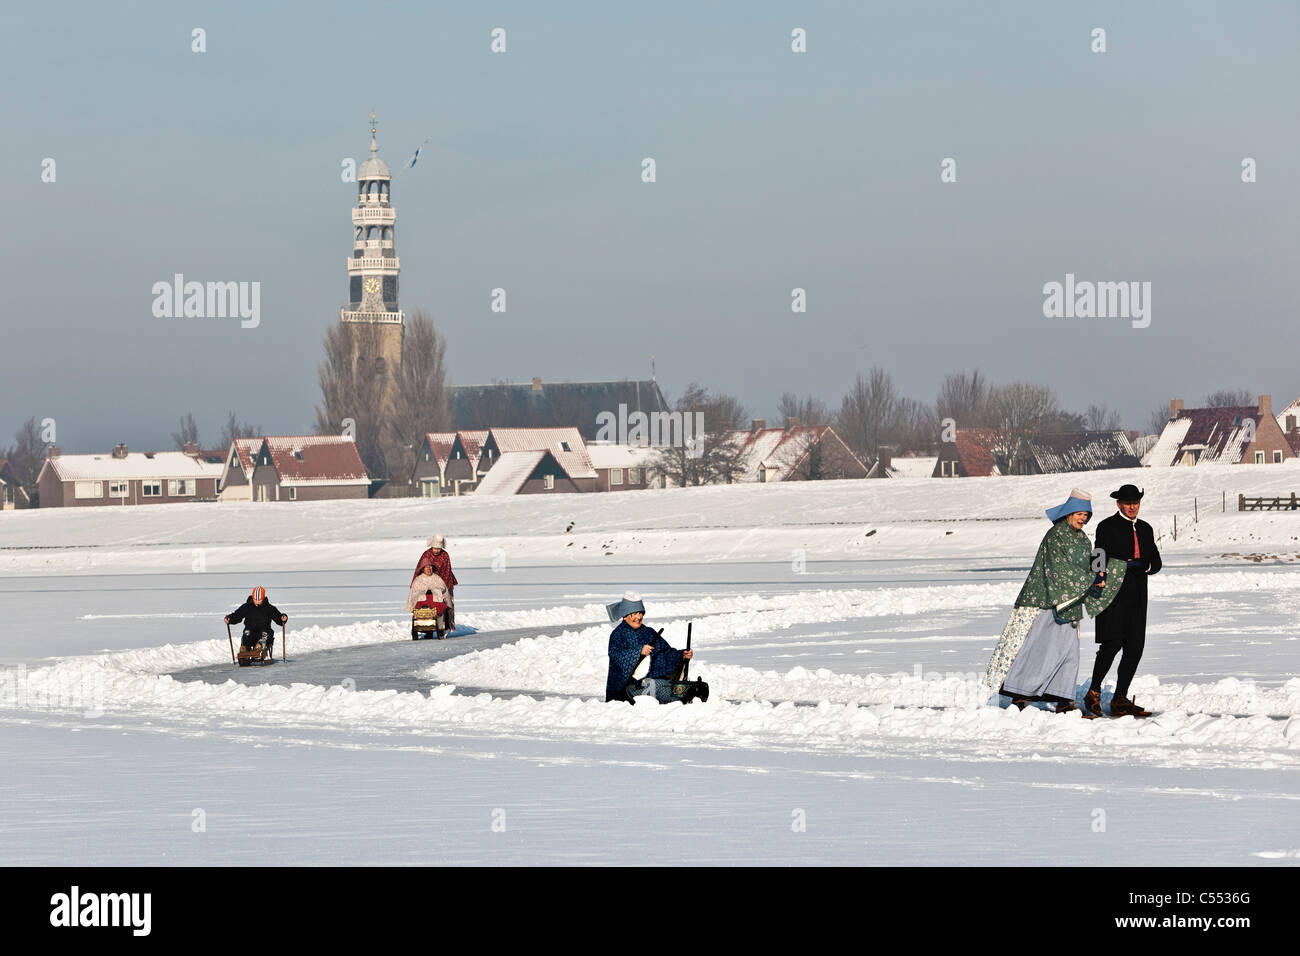 Dutch capital of skating culture. People in traditional dress, figure scating, sledging with prickers, and skating with sledge. Stock Photo